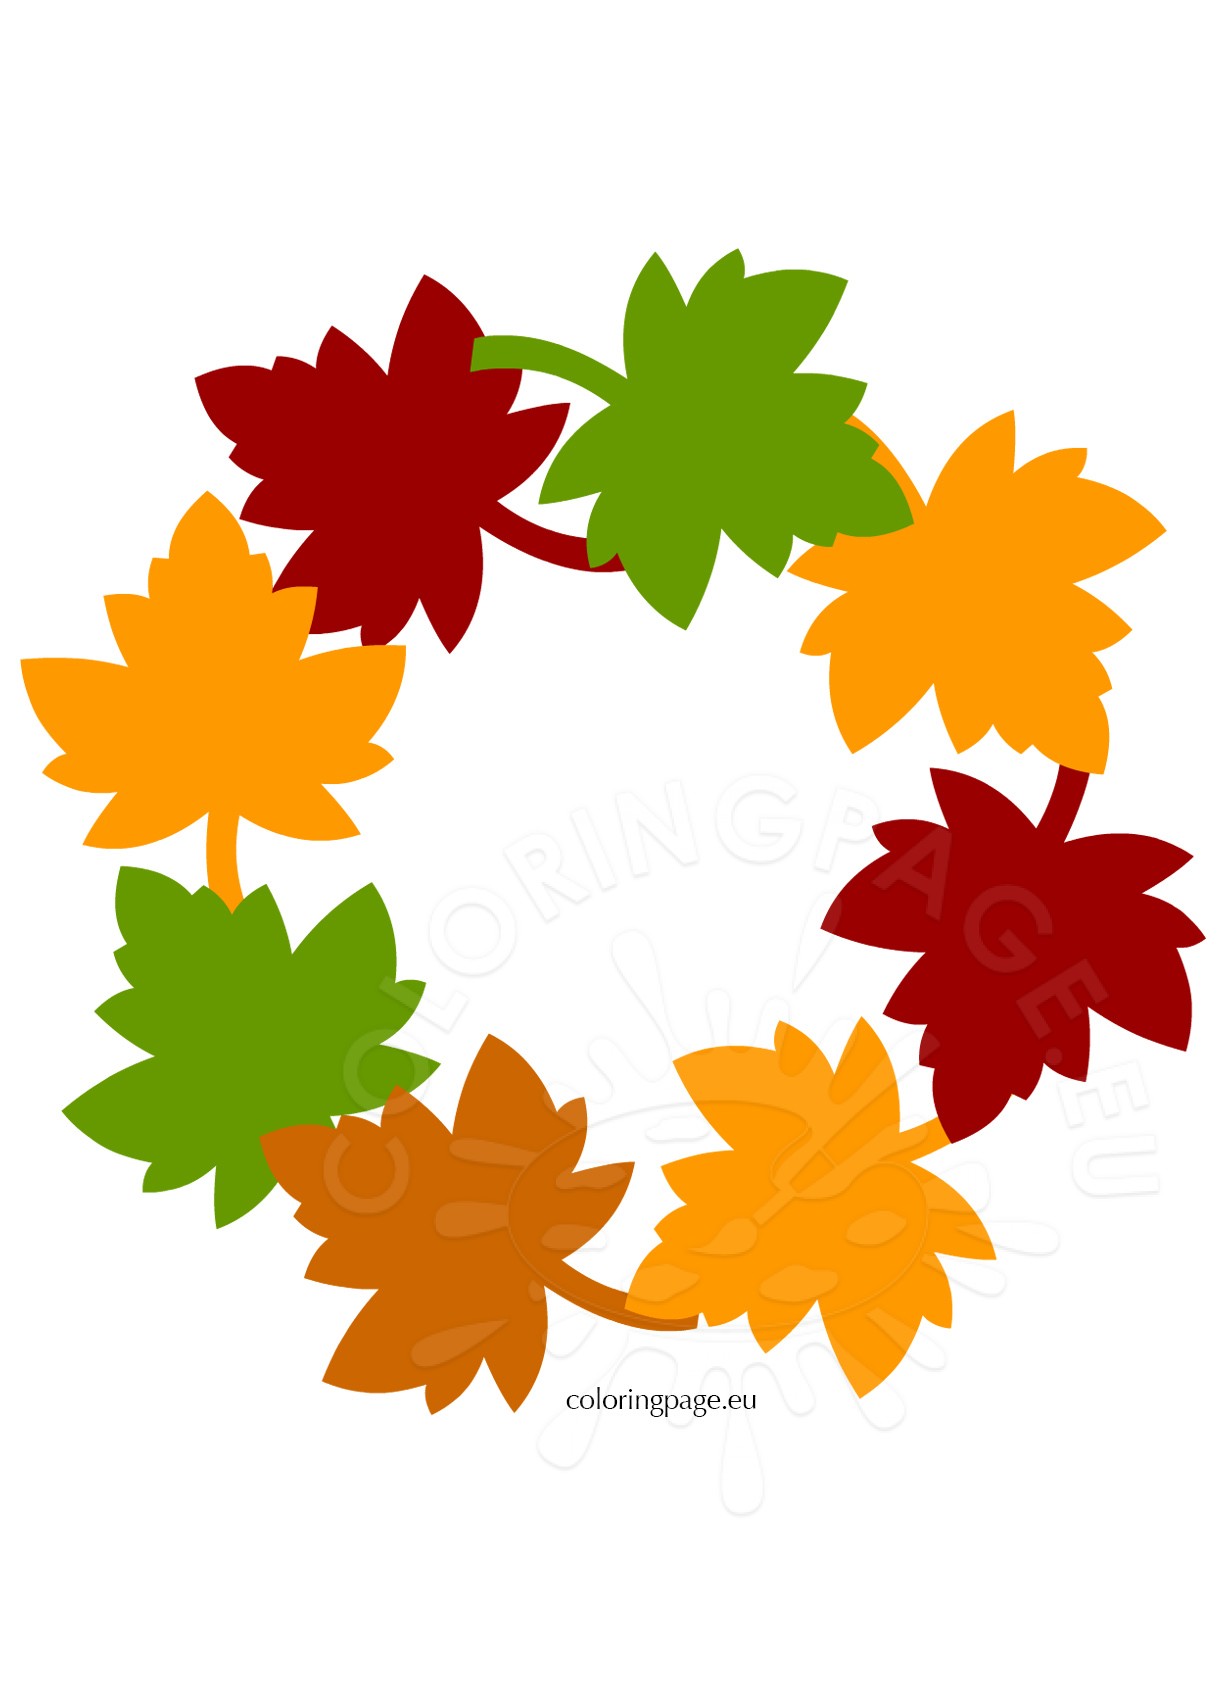 Fall Leaf Wreath Craft | Coloring Page